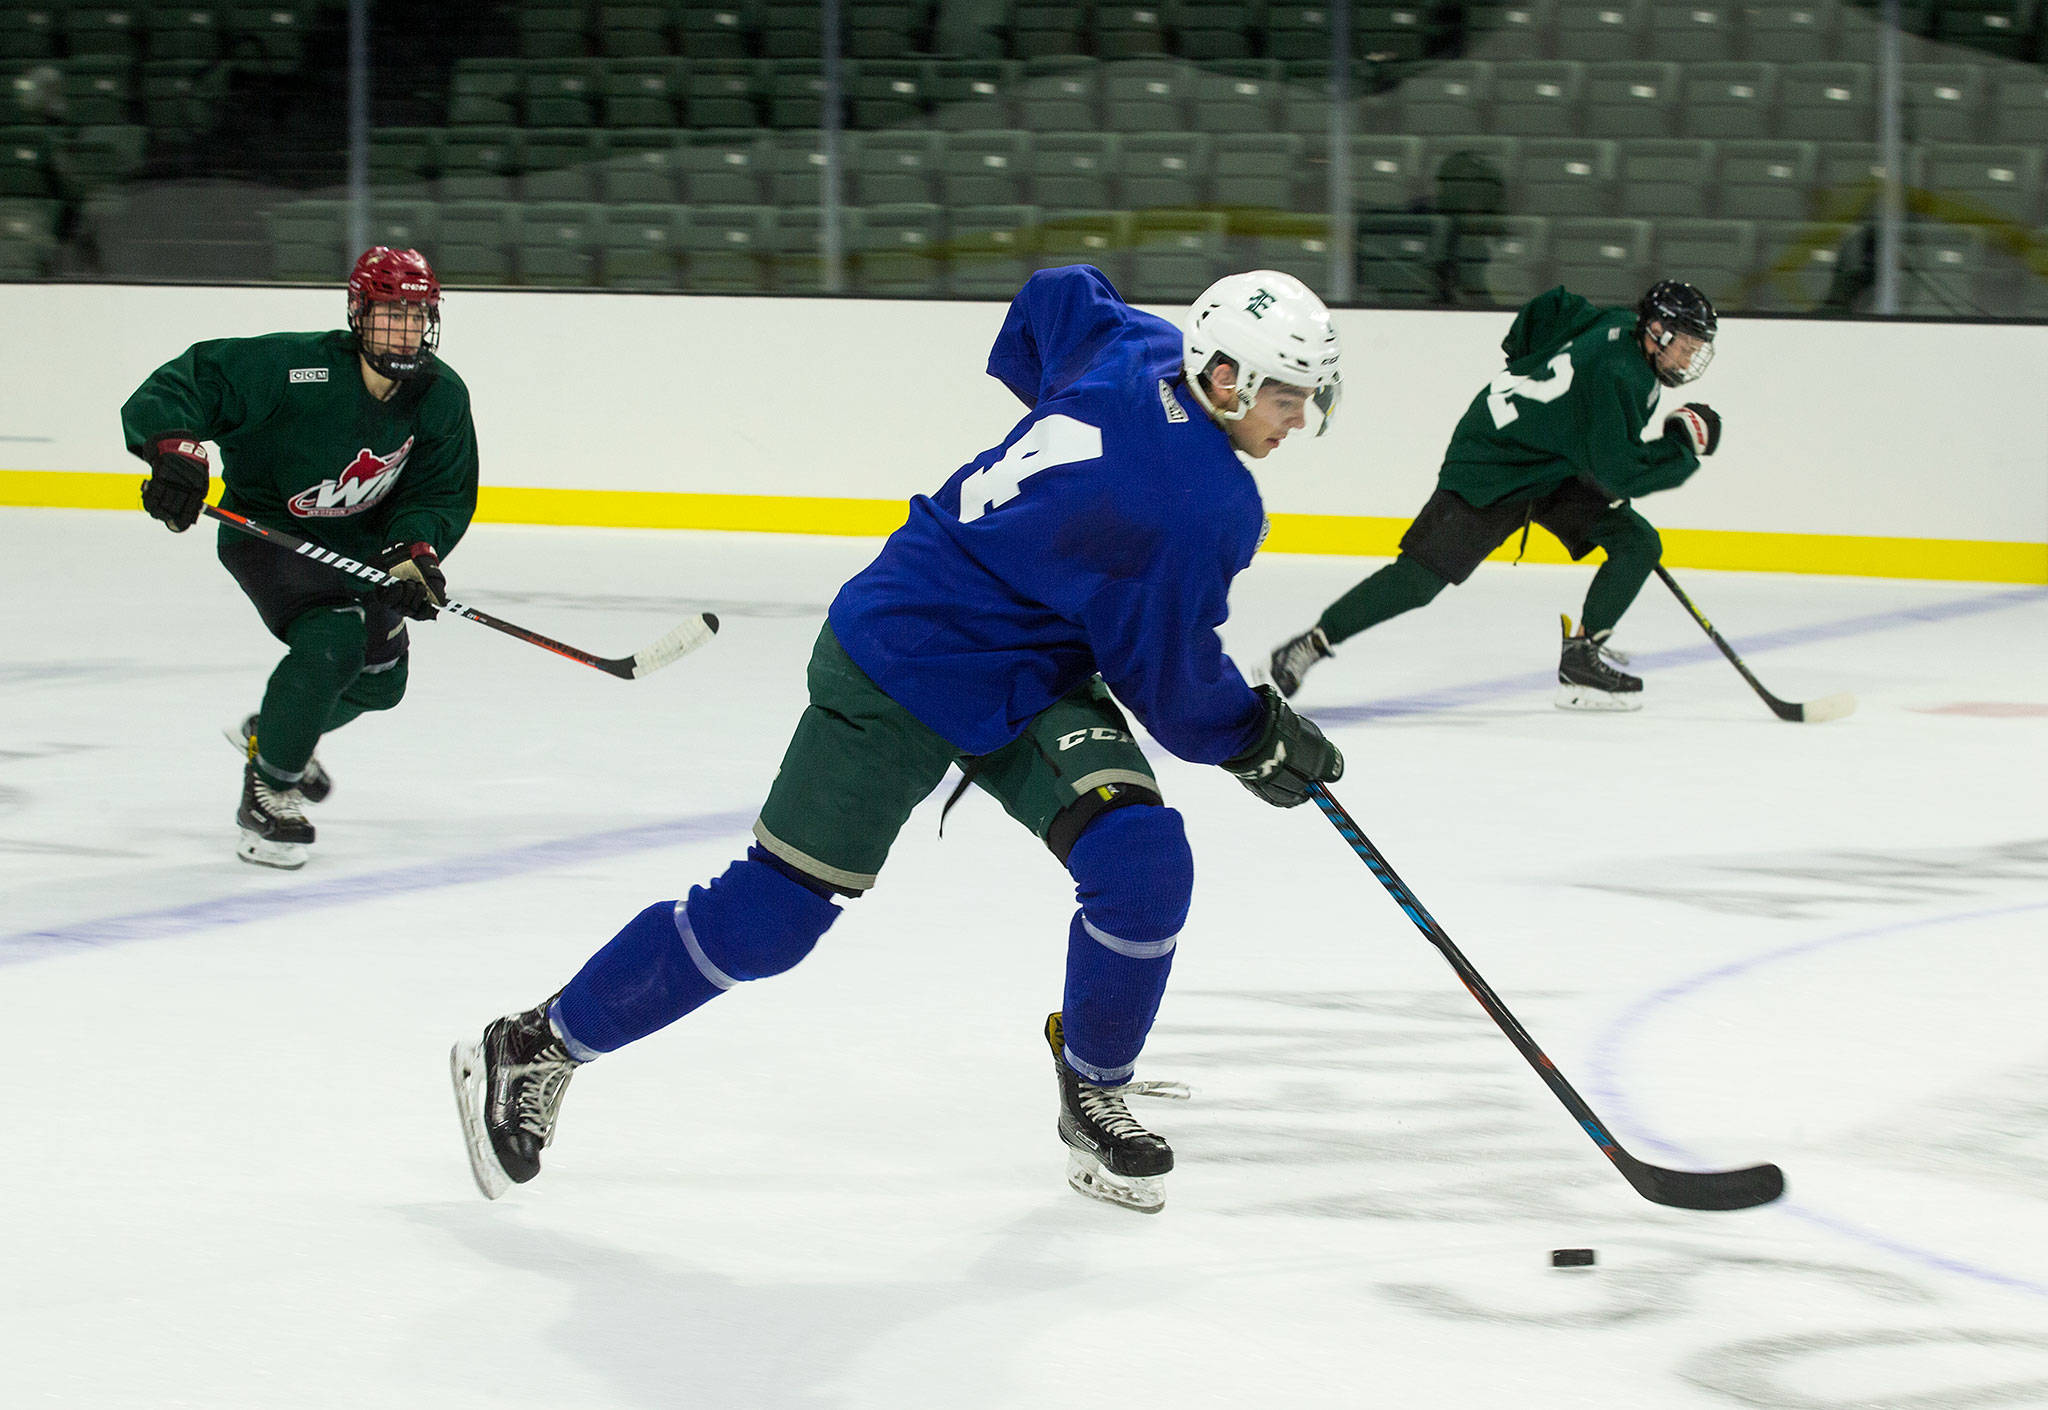 The Silvertips’ Ian Walker (center) is chased as he takes skates down the ice during training camp on Aug. 23, 2018, at Angel of the Winds Arena in Everett. (Andy Bronson / The Herald)